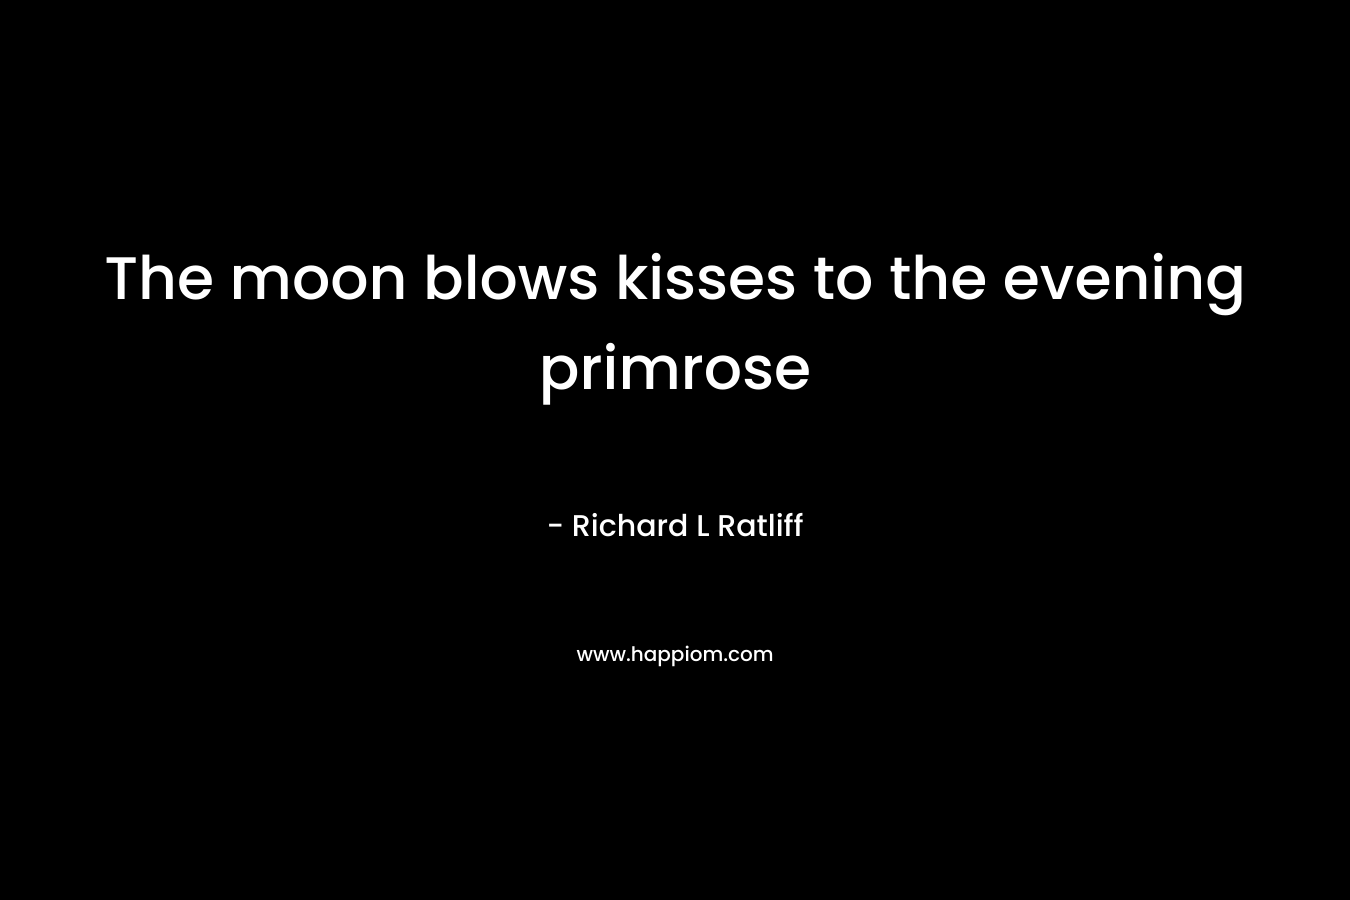 The moon blows kisses to the evening primrose